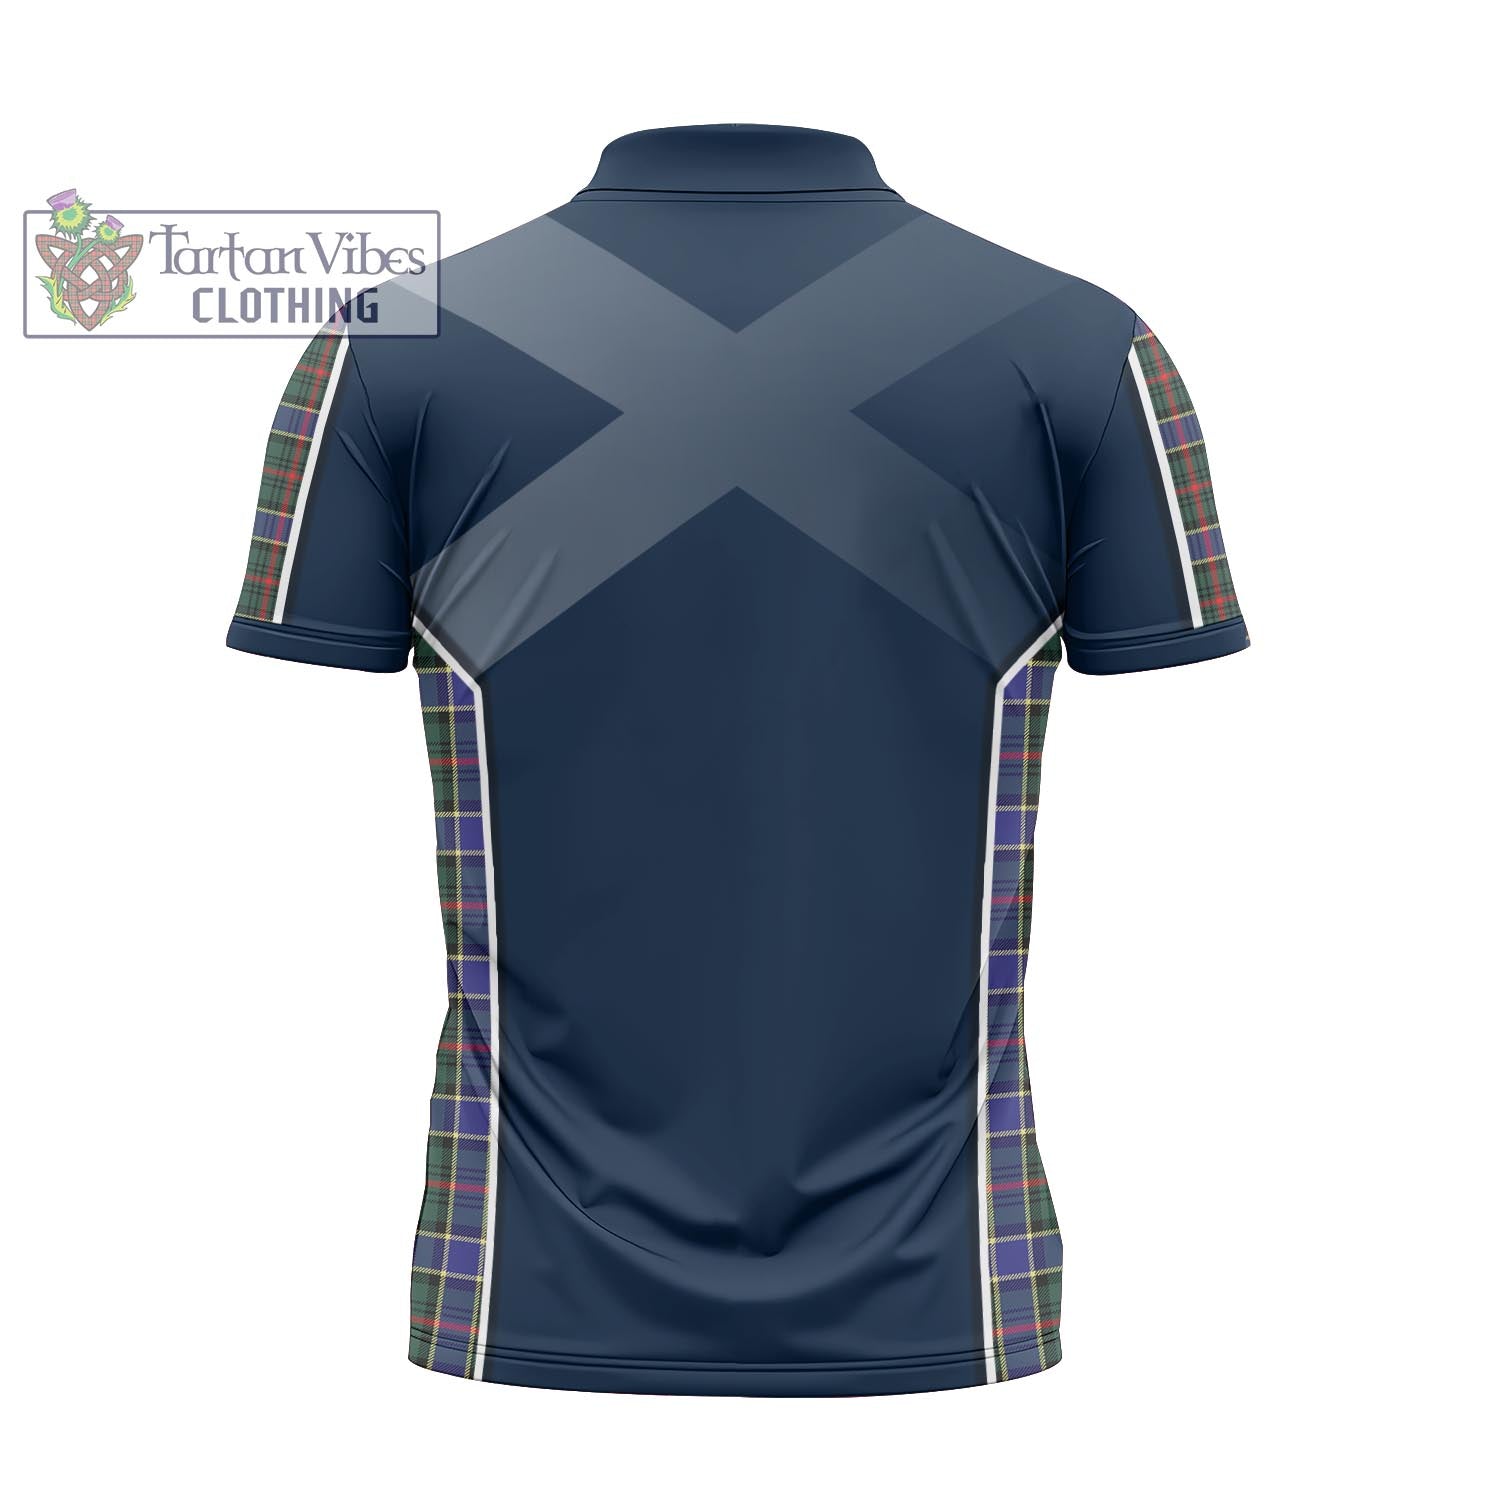 Tartan Vibes Clothing Ogilvie (Ogilvy) Hunting Modern Tartan Zipper Polo Shirt with Family Crest and Lion Rampant Vibes Sport Style